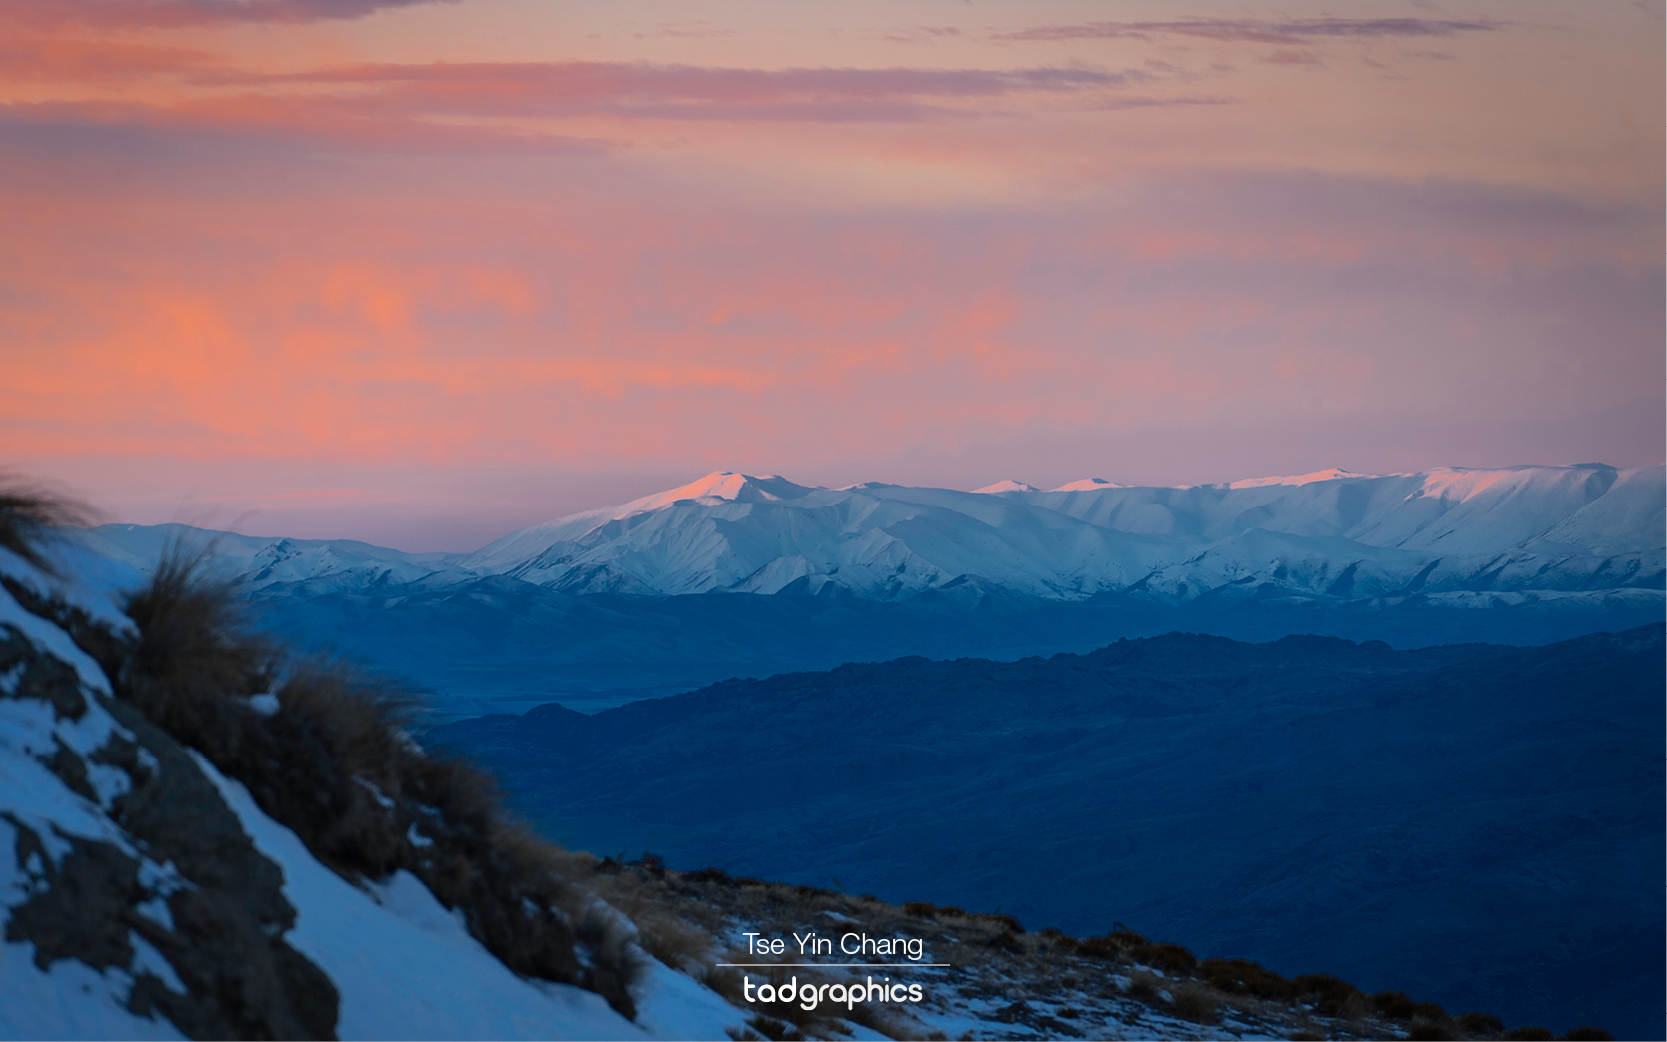 Vivid winter sunset taken from Duffers Saddle, New Zealand’s highest public road, reaching a height of 1,300 meters above sea level